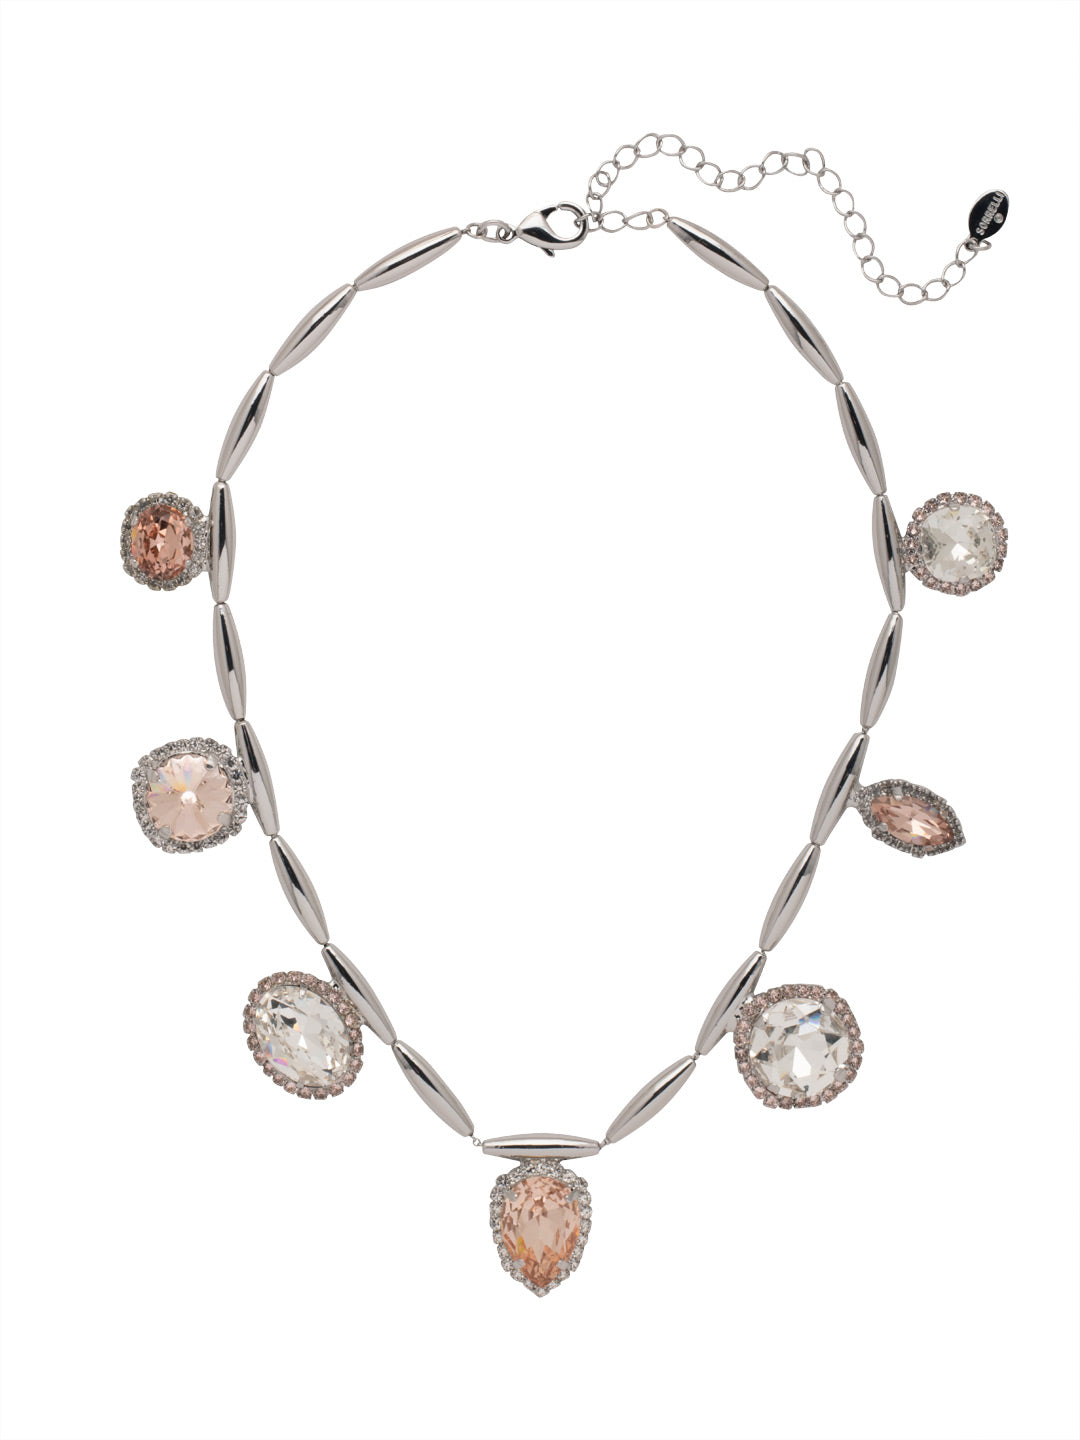 Product Image: Giselle Statement Necklace